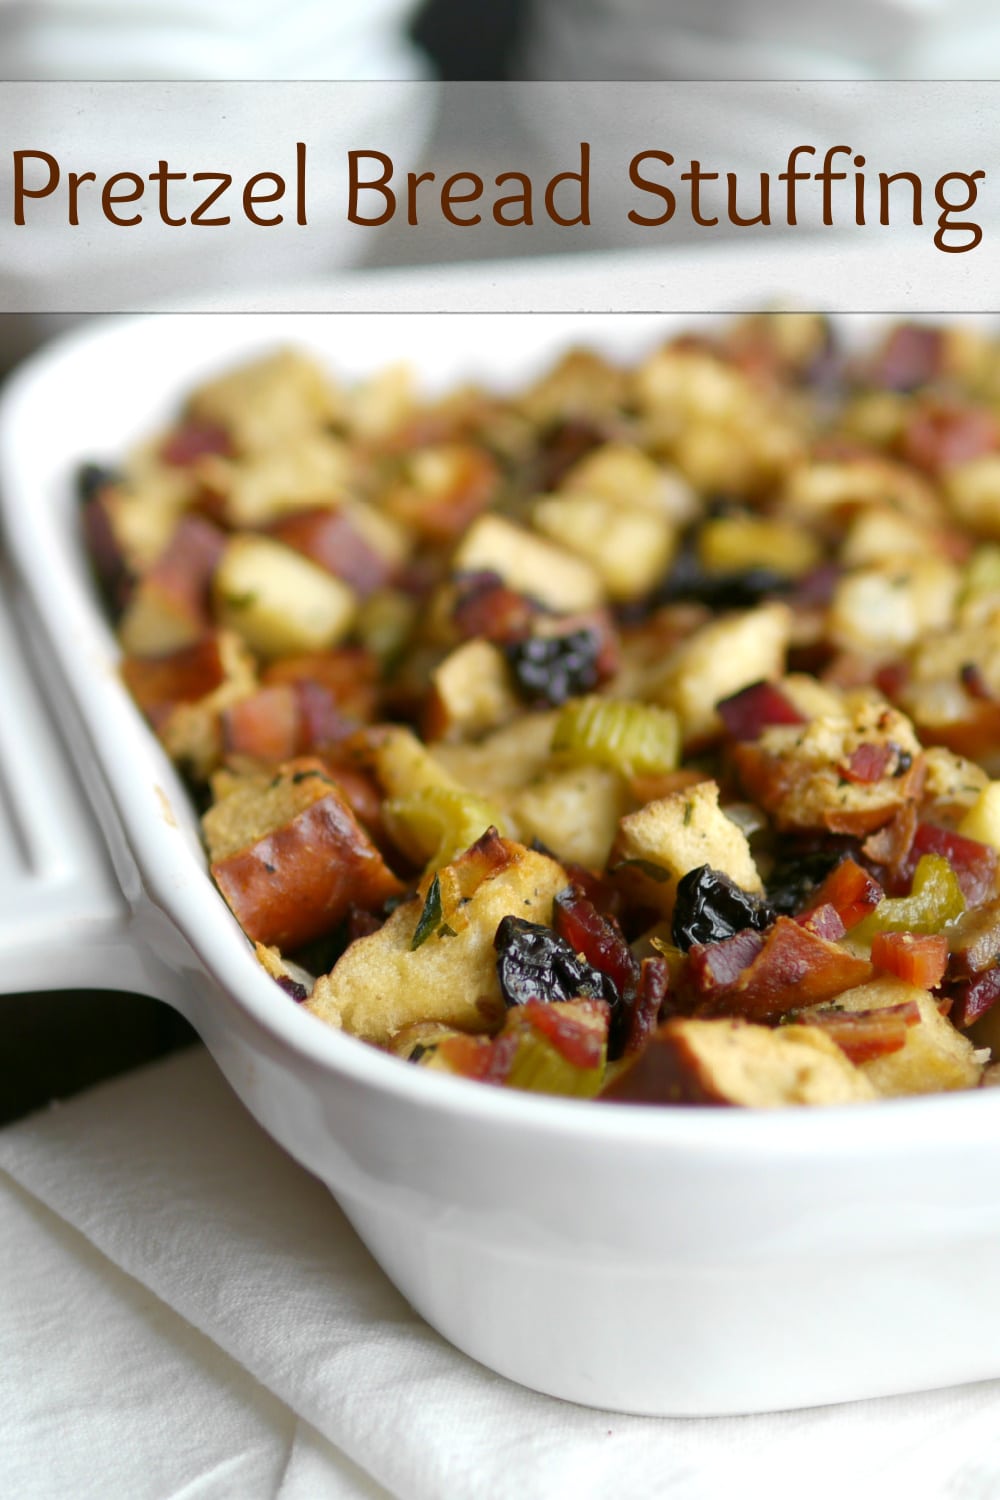 This Pretzel Bread Stuffing is a crave-worthy recipe you'll  want to serve again and again. This unconventional stuffing twist, packed with the perfect blend of pretzel bread, thick-cut bacon, apple, and more, will have you hooked from the very first bite—irresistible and non-traditional, it's a flavor adventure you won't want to end. via @cmpollak1